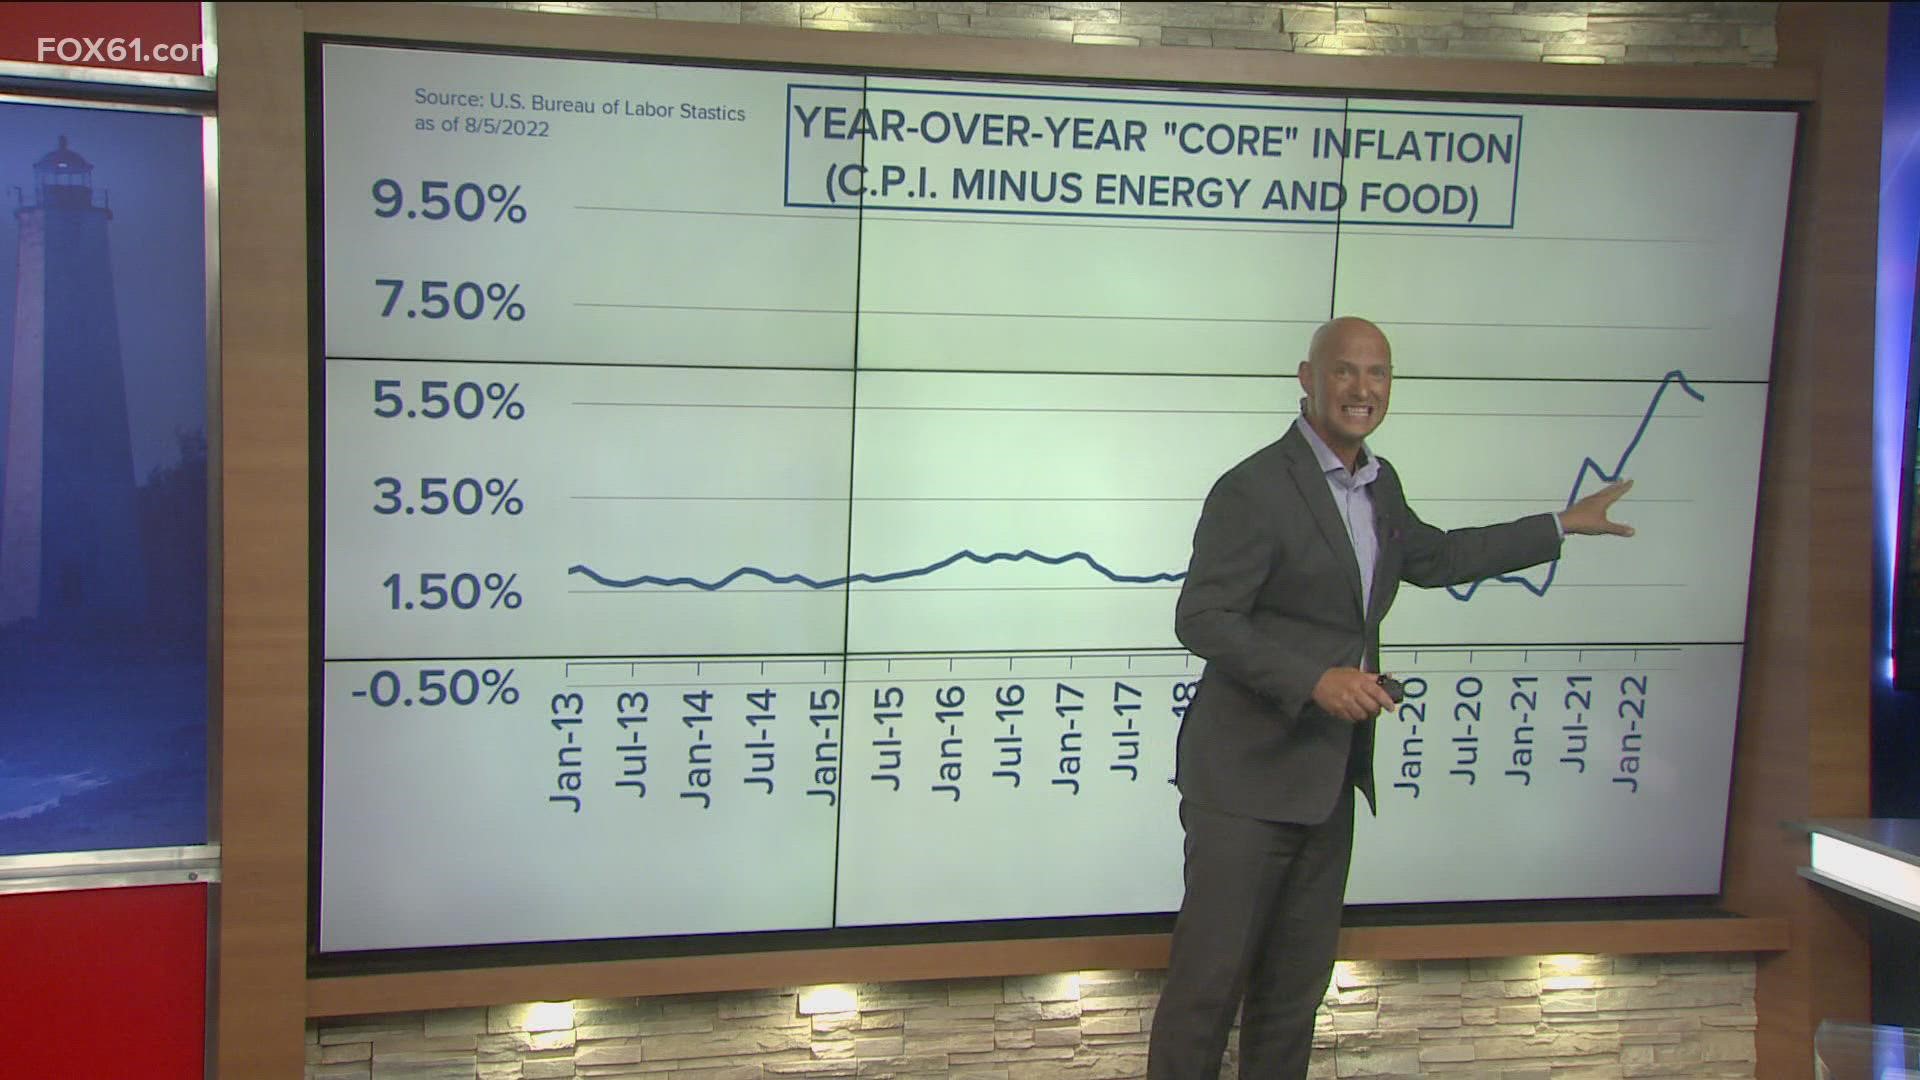 Food and energy make up a quarter of the index.